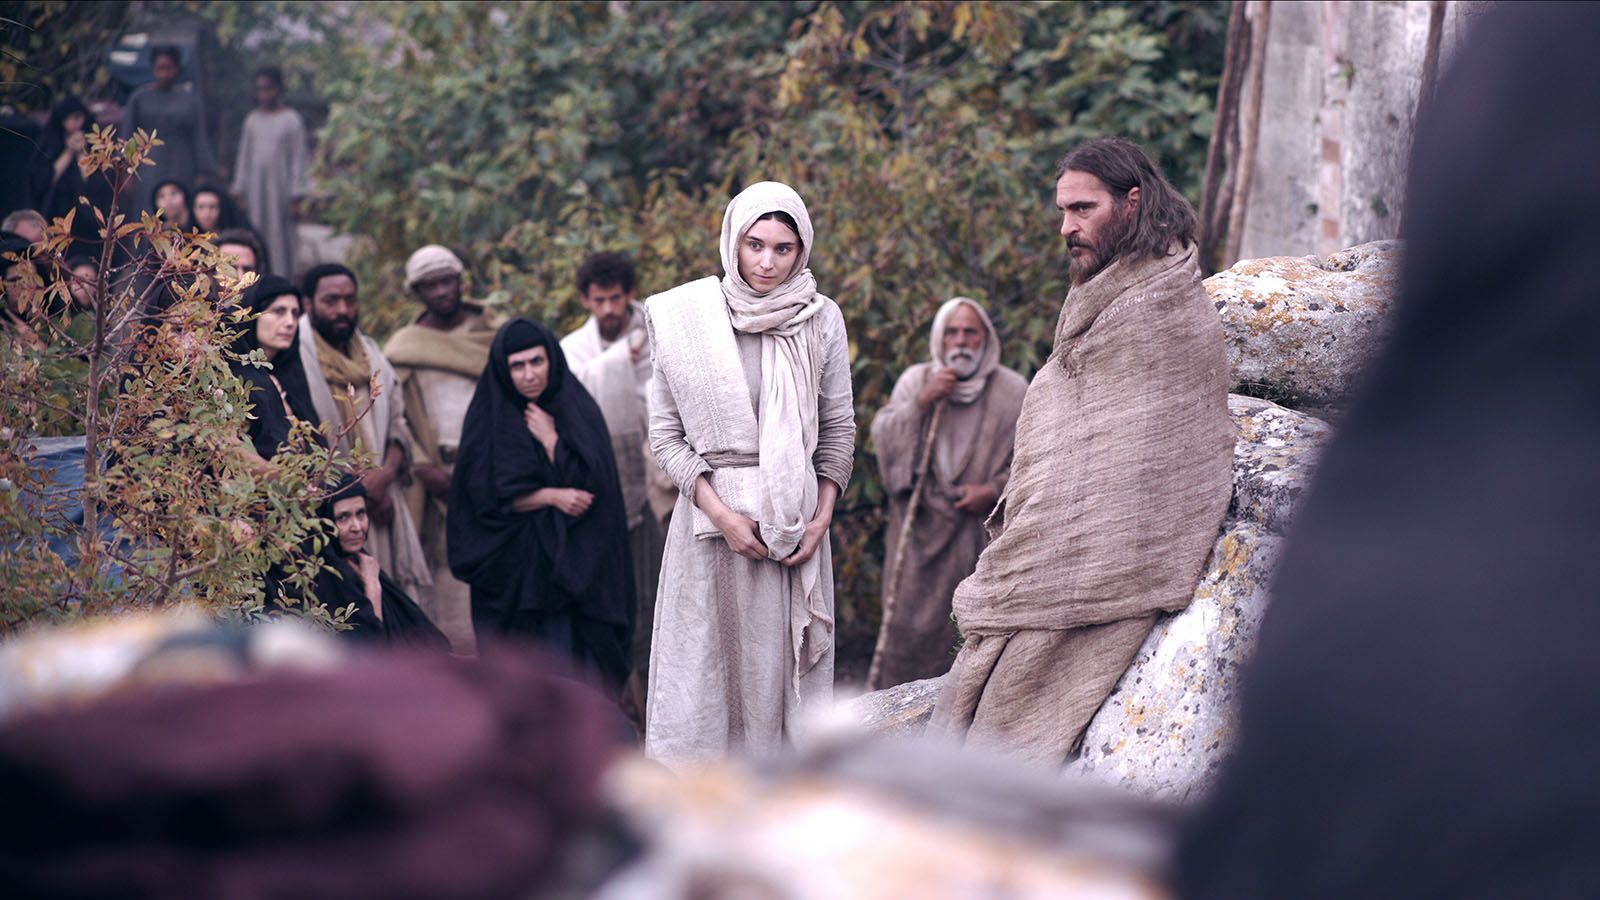 In new film, Mary Magdalene is rechristened a revolutionary